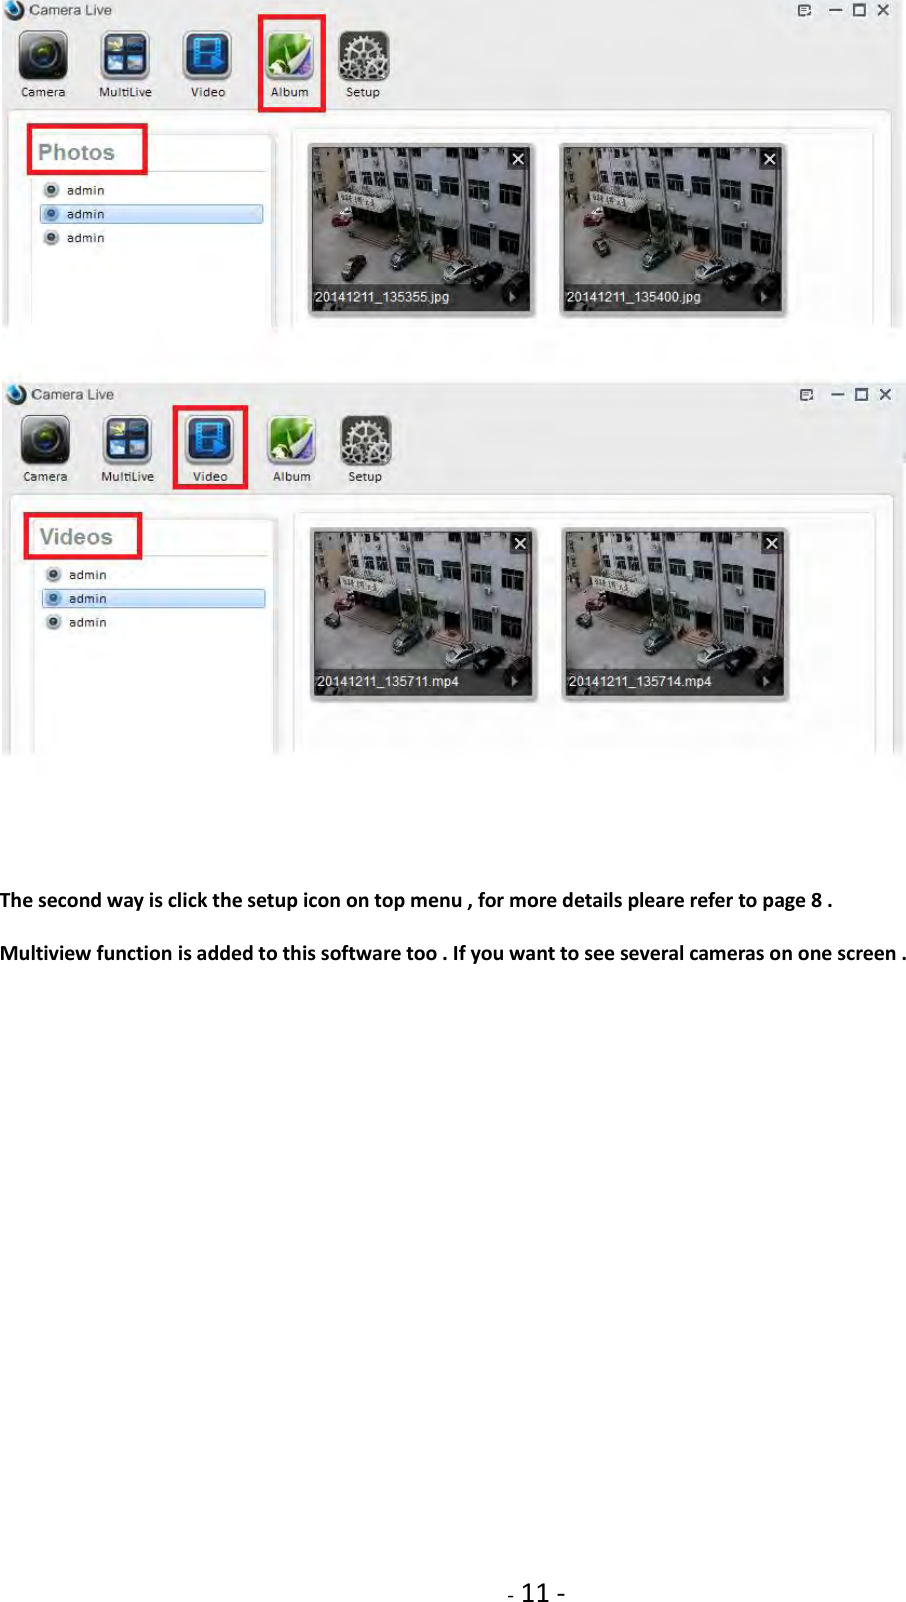    - 11 -   The second way is click the setup icon on top menu , for more details pleare refer to page 8 .    Multiview function is added to this software too . If you want to see several cameras on one screen . 